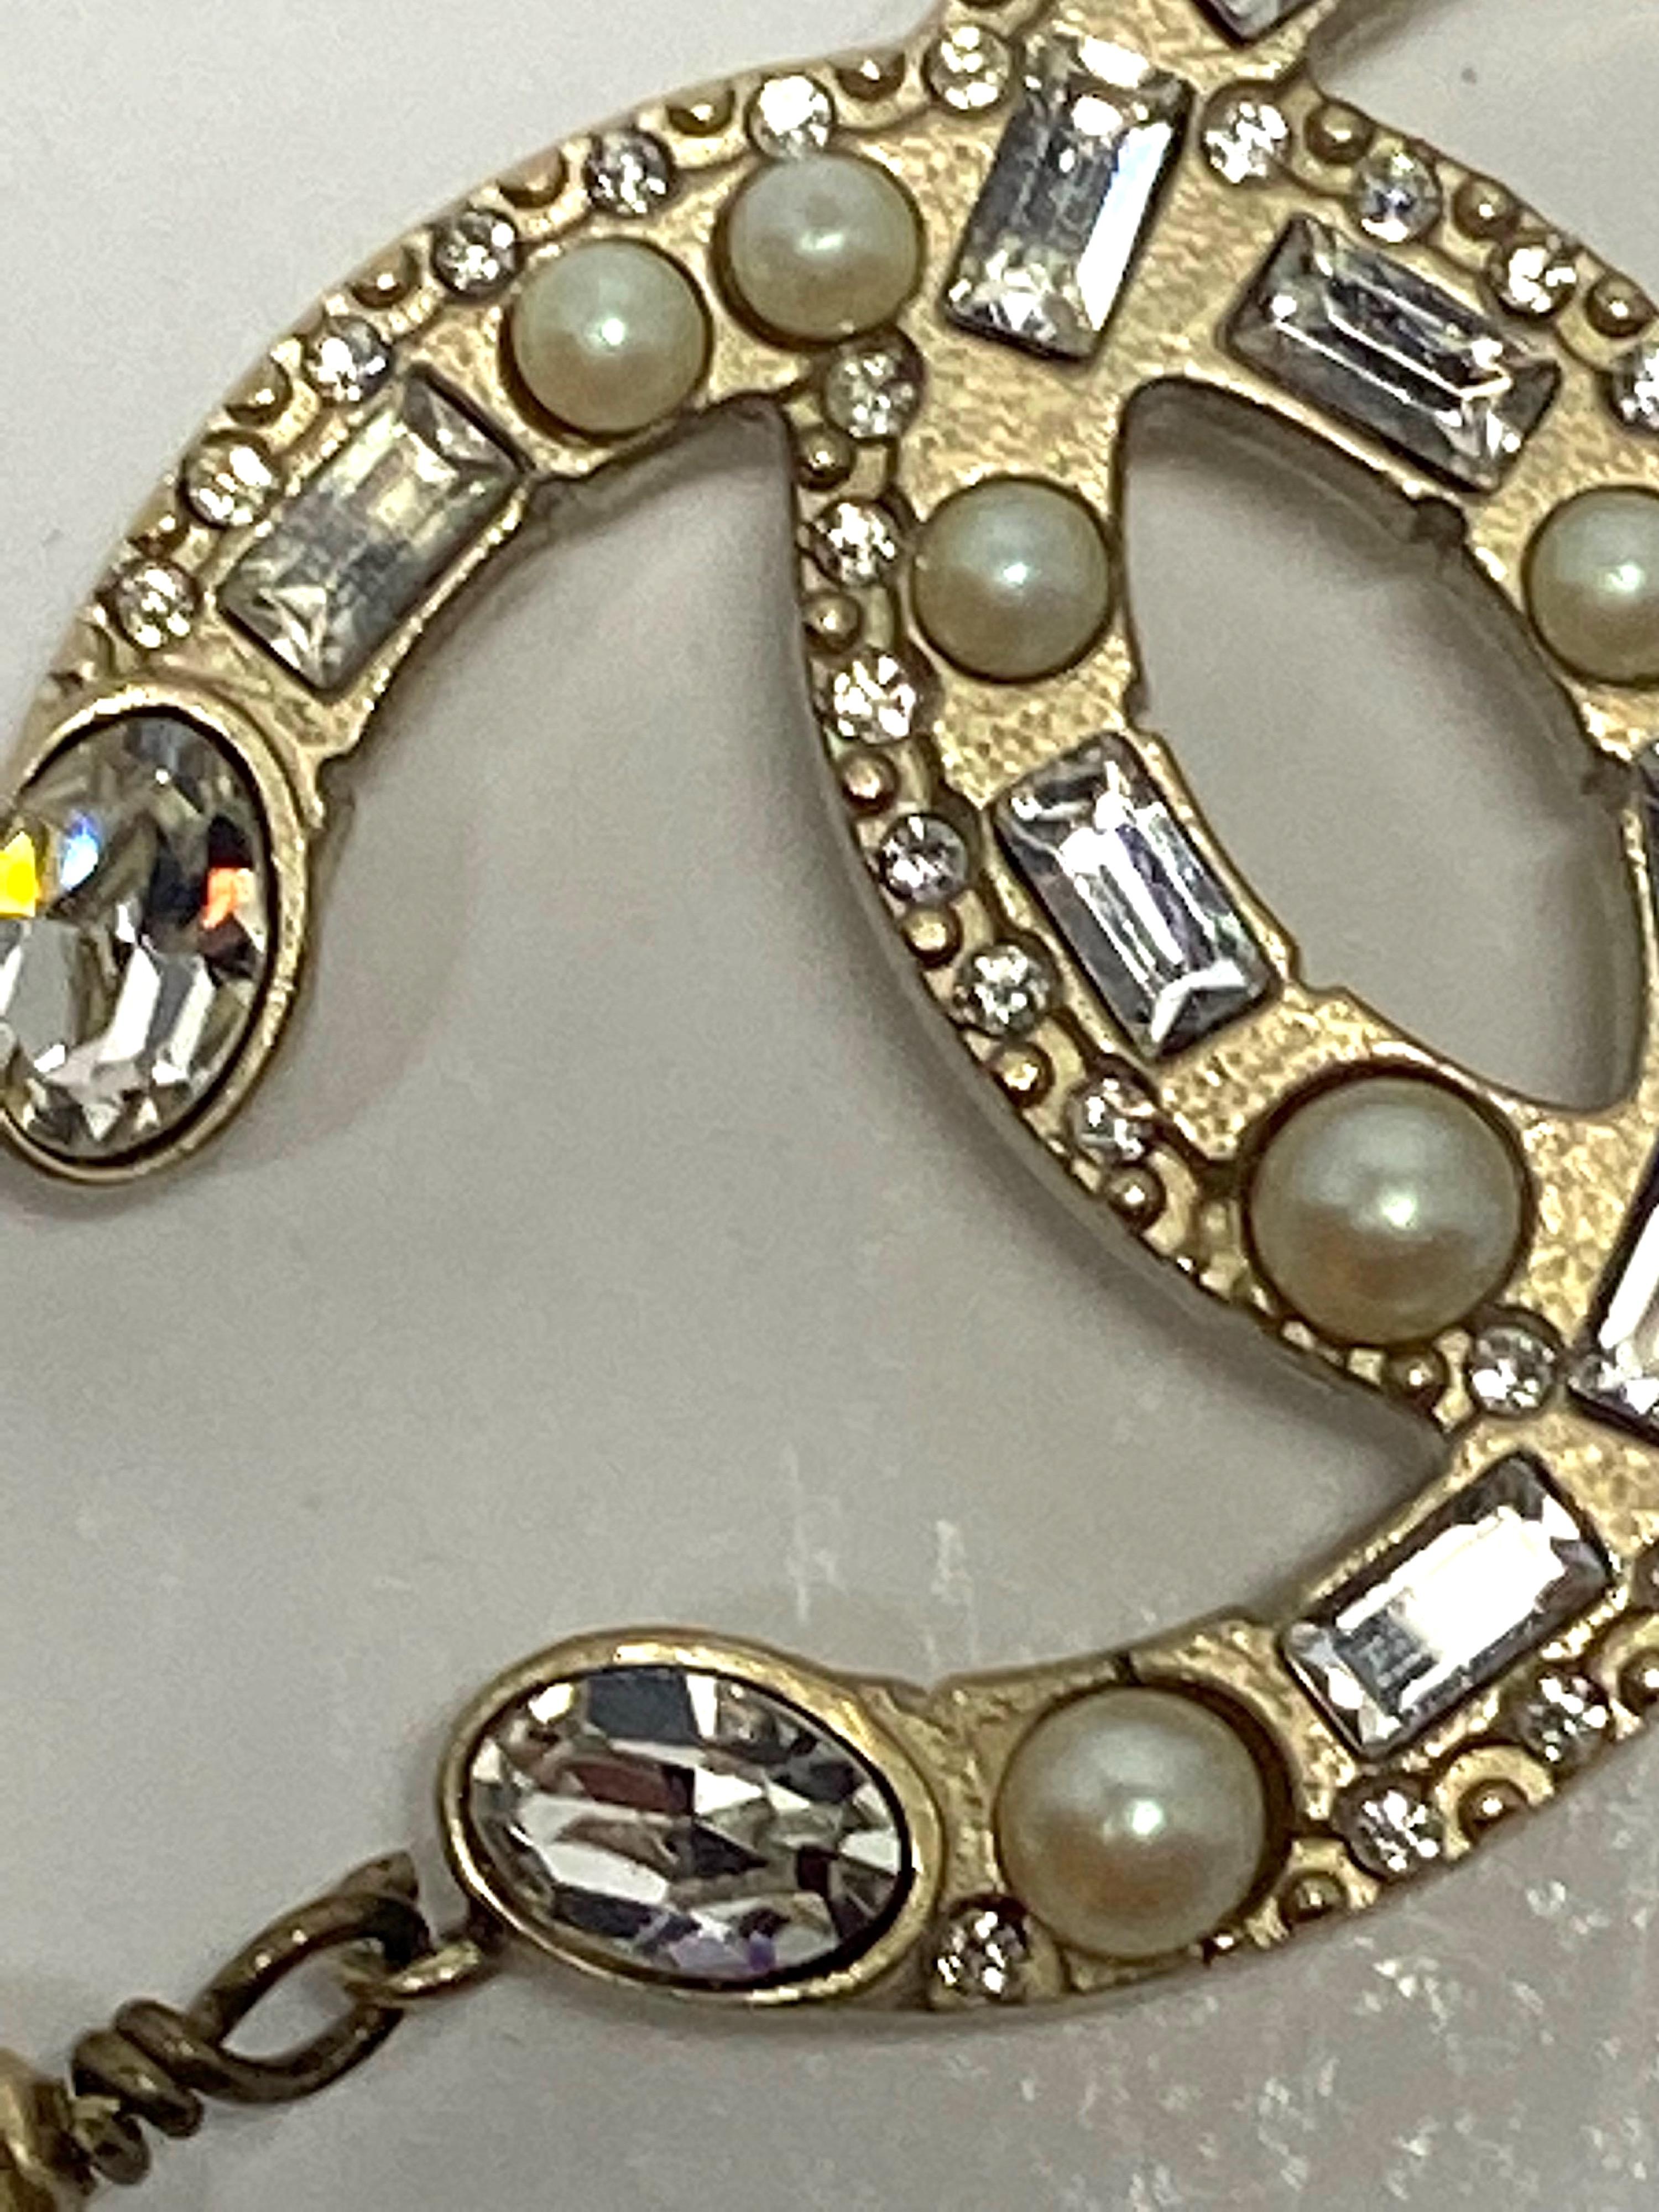 Chanel Fall 2009 Pearl  and Cristal  Bead Bracelet For Sale 5